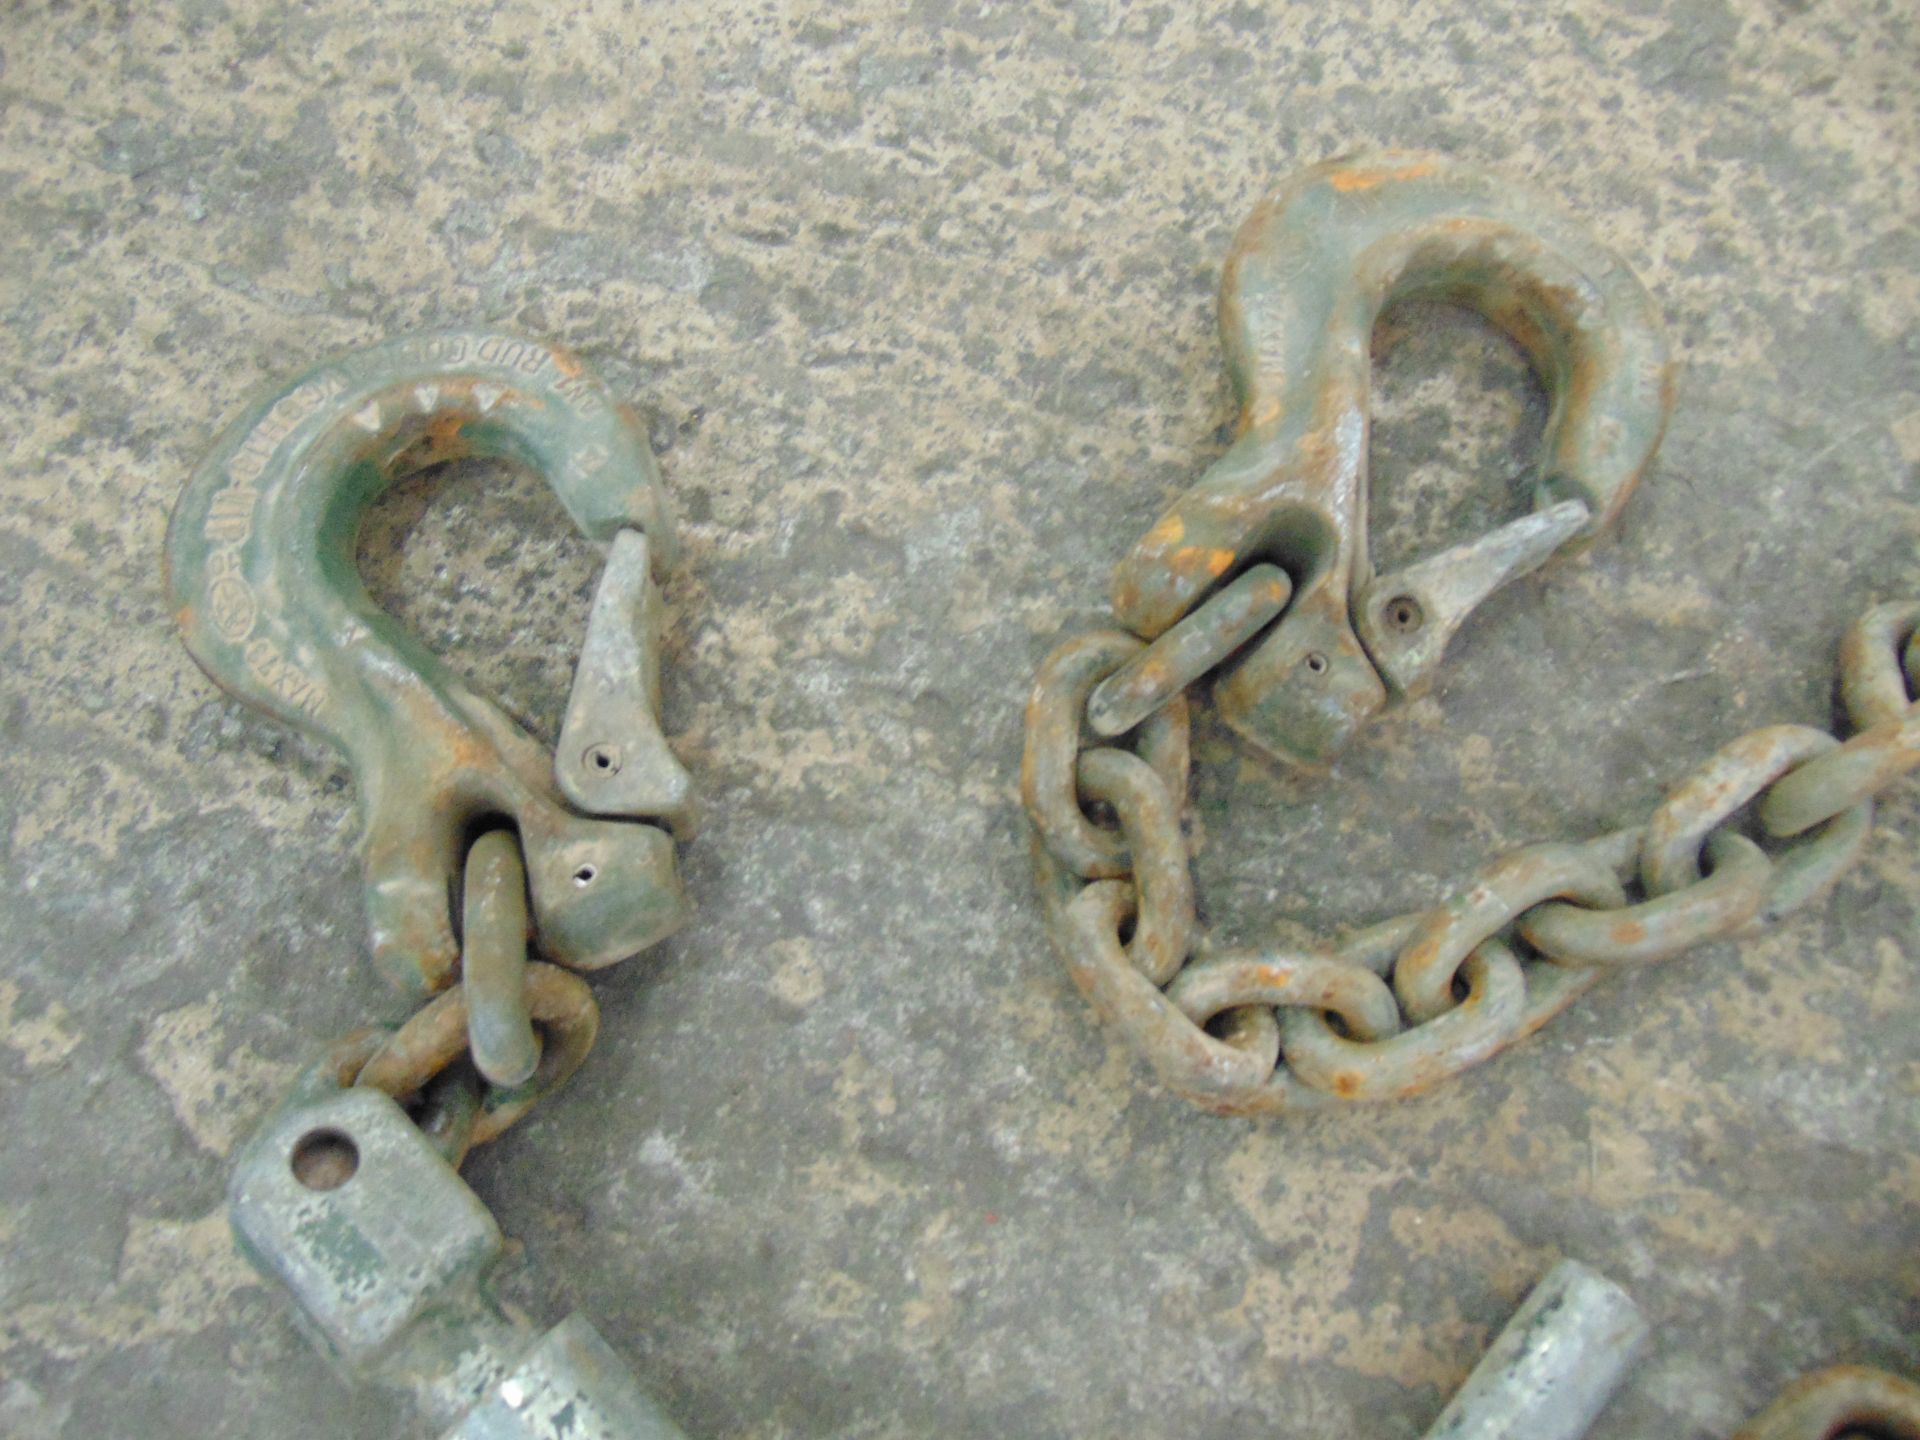 Very Heavy Duty RUD Lashing Chain with Ratchet Tensioner - Image 2 of 5